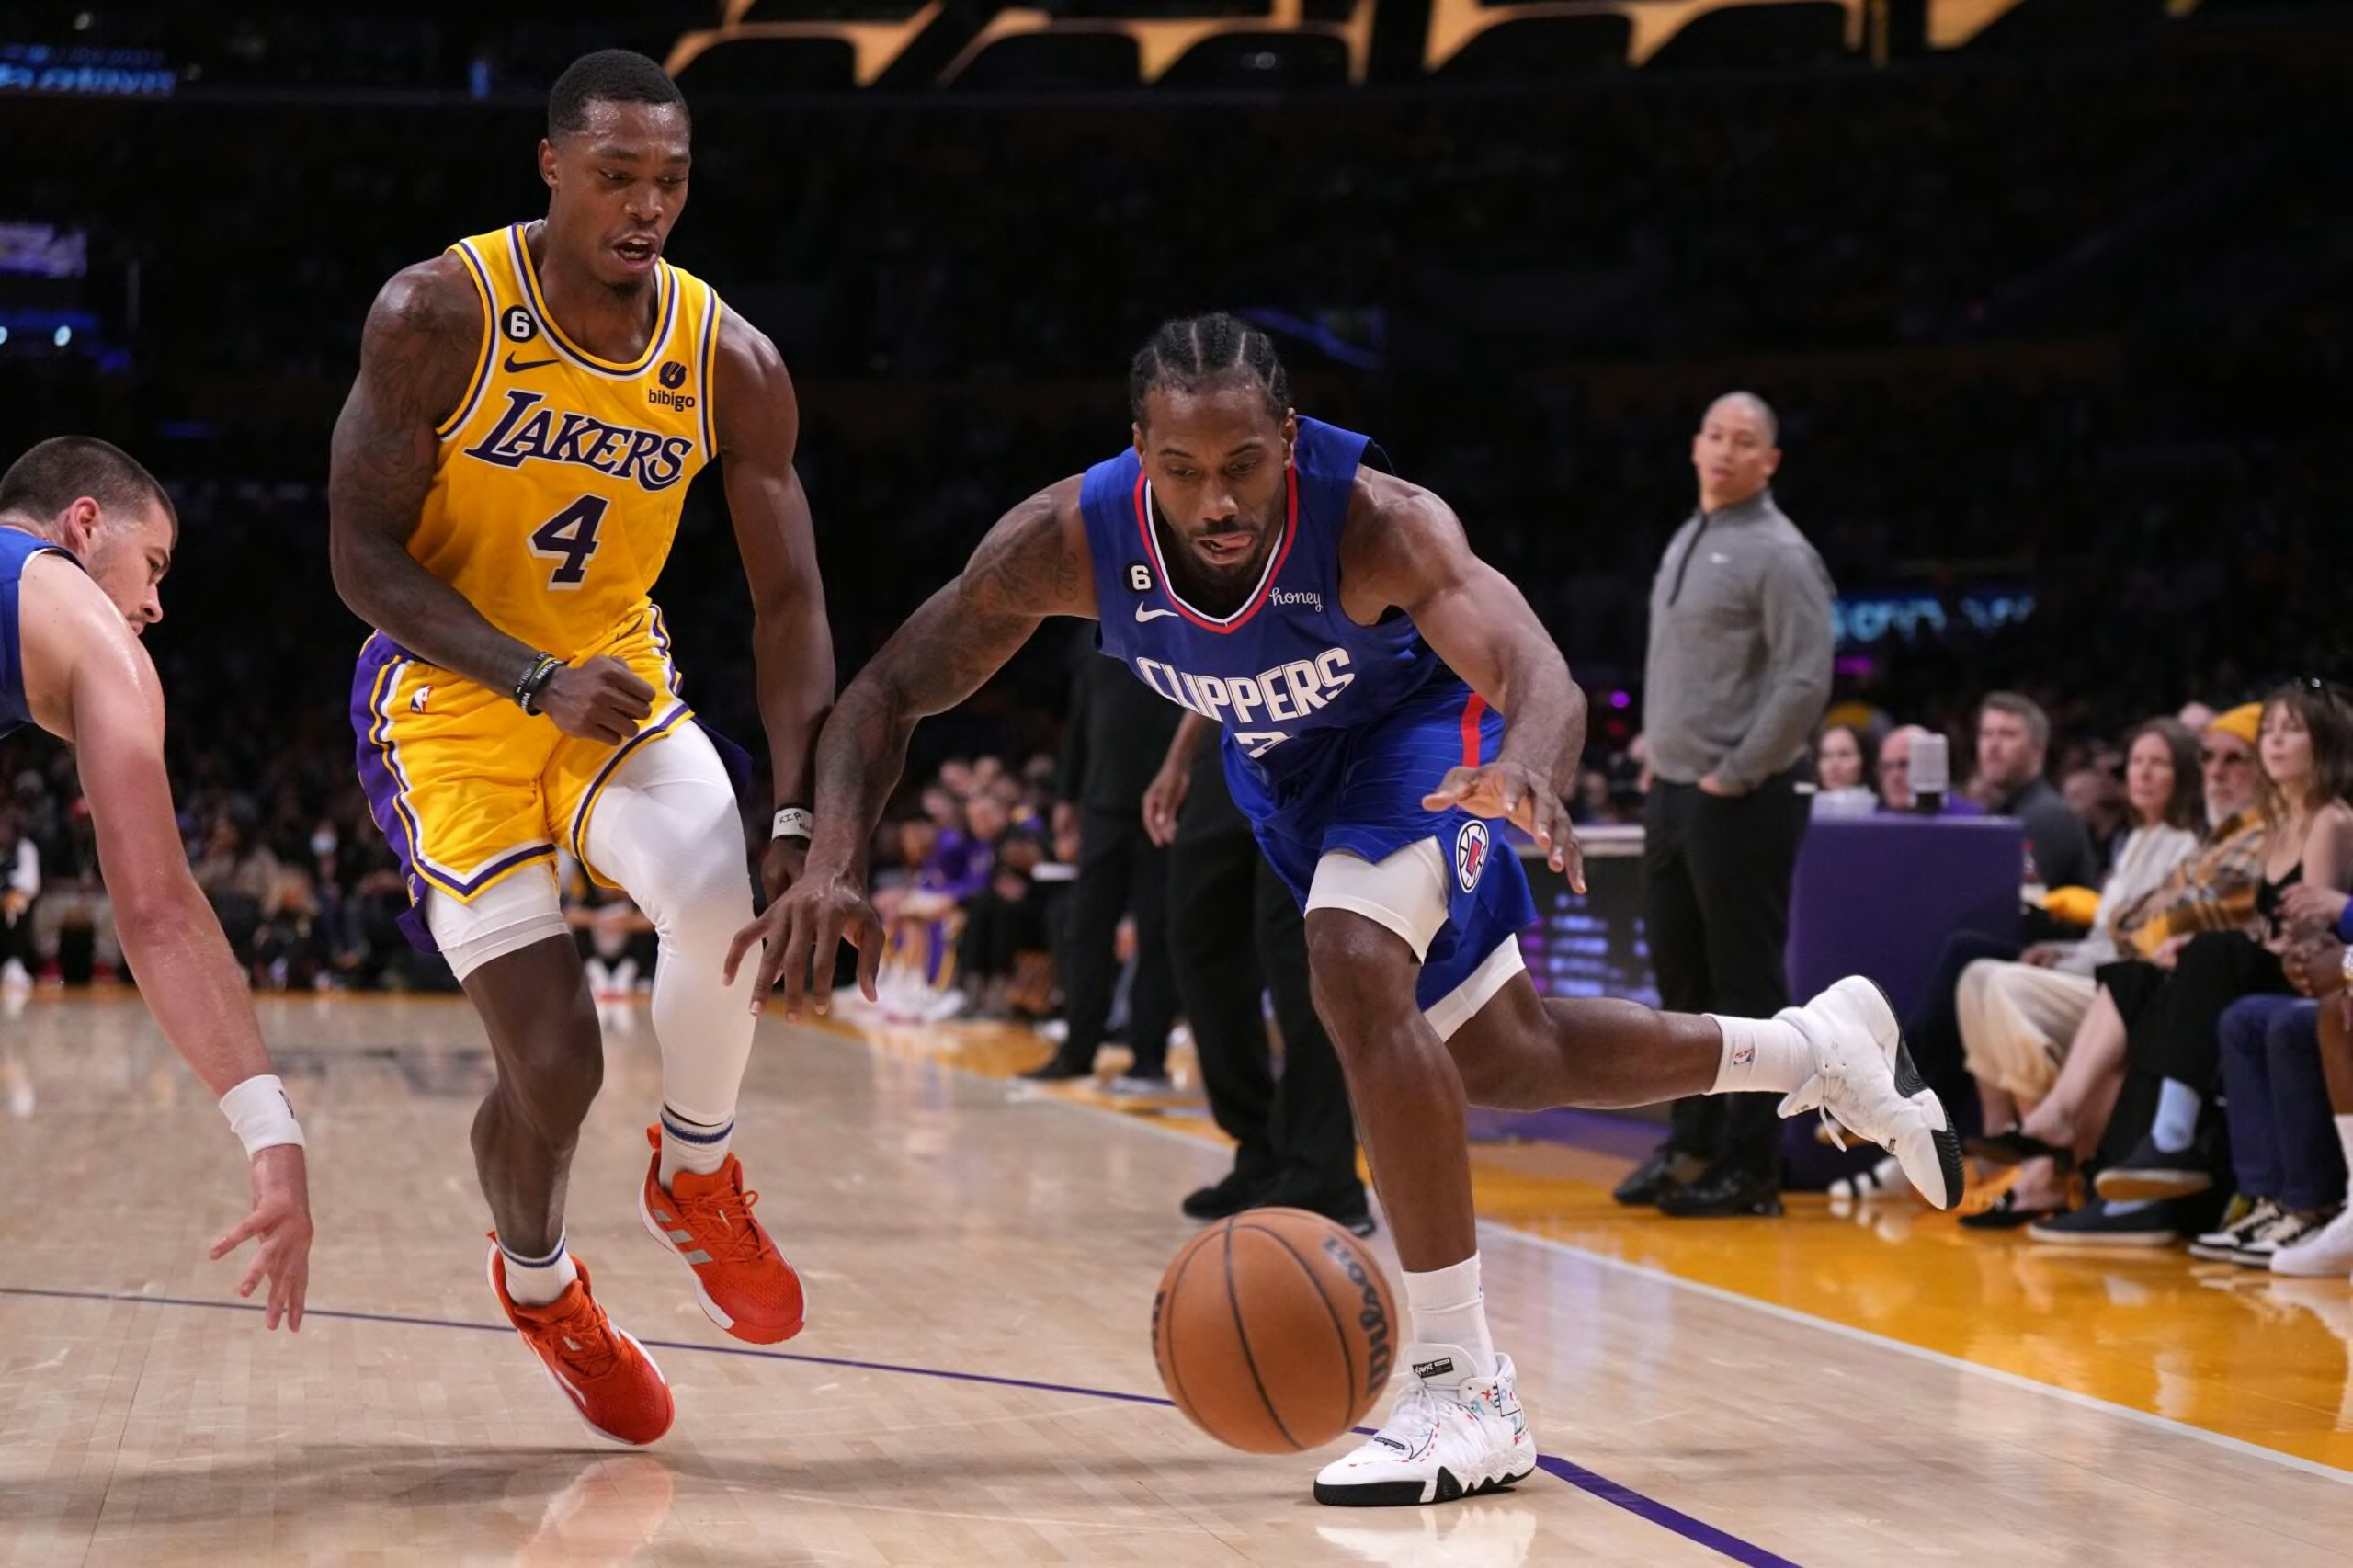 Photos: Lakers vs Clippers (3/3/22) Photo Gallery